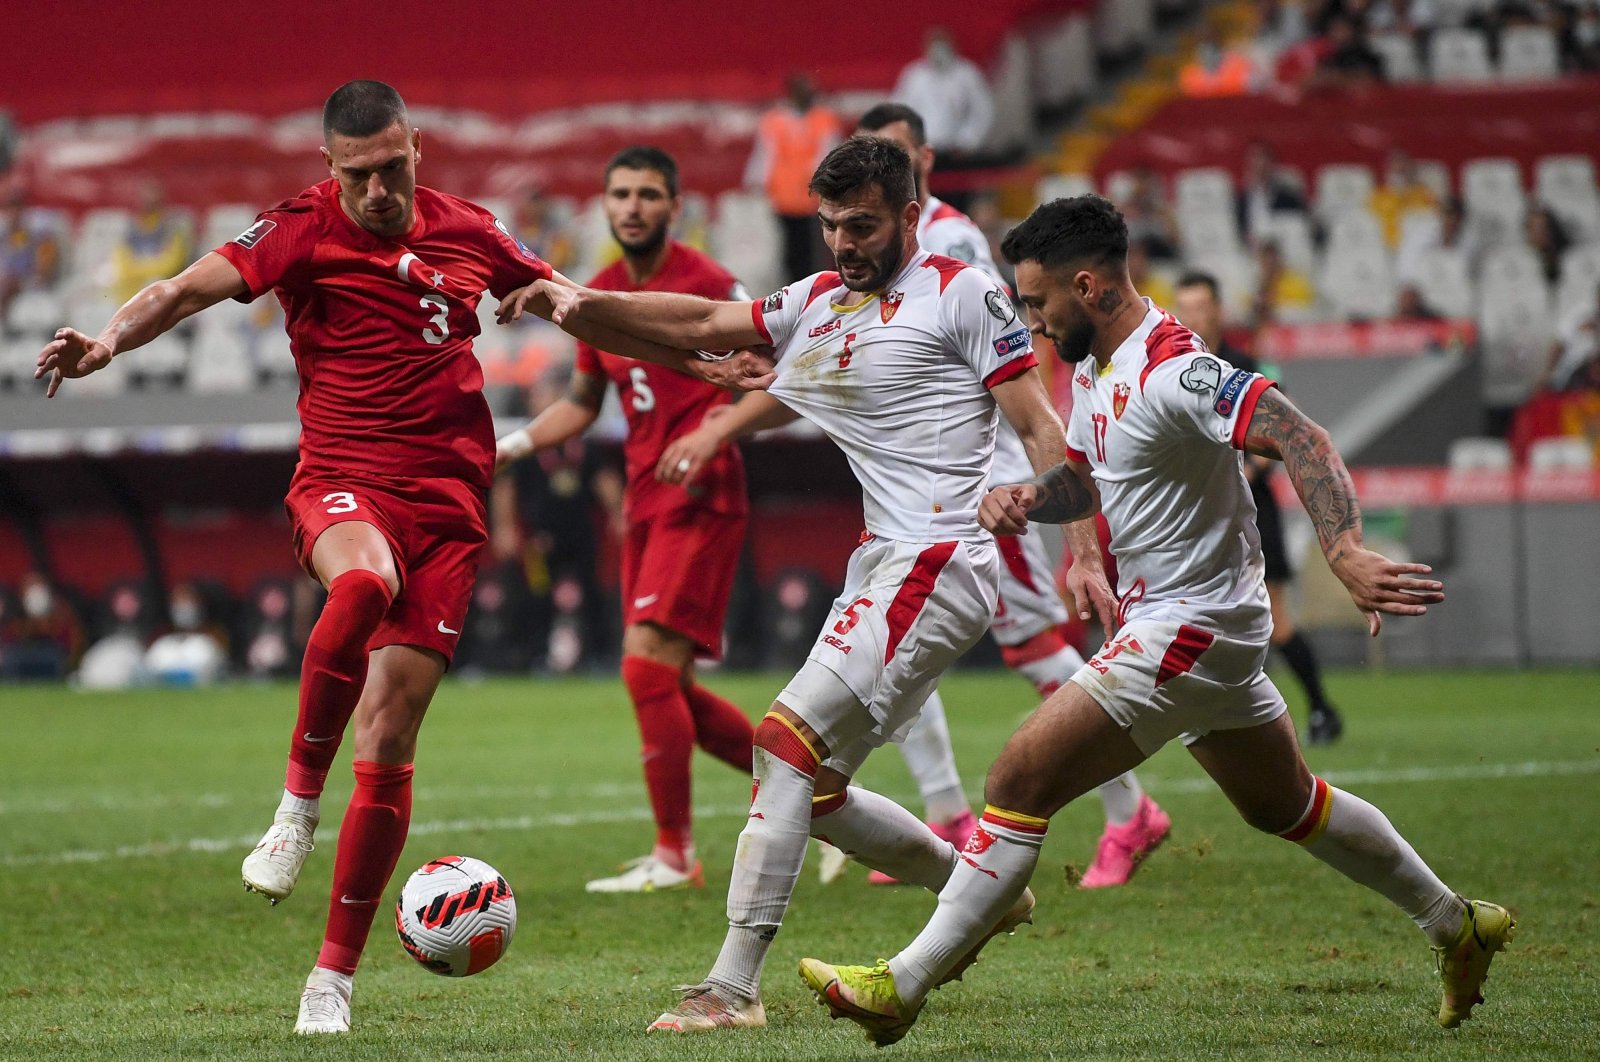 Turkey defender Merih Demiral (L) fights for the ball with Montenegro's Igor Vujacic (C) and Stefan Savic (R) during their FIFA World Cup Qatar 2022 qualifier at the Vodafone Stadium, Istanbul, Turkey, Sept. 1, 2021. (AFP Photo)